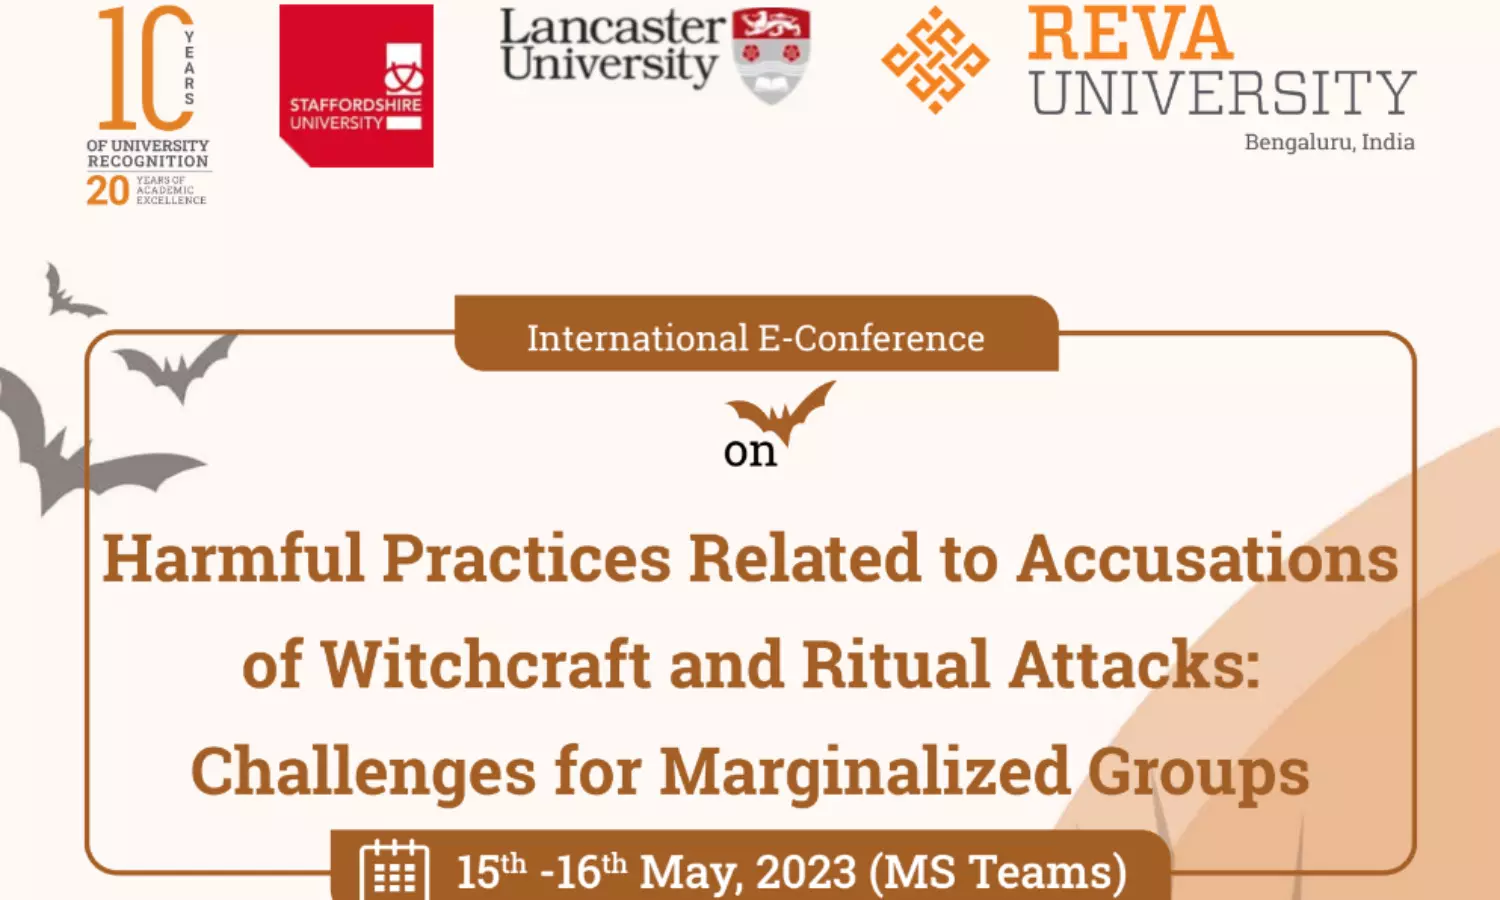 International Conference on Harmful Practices Related to Accusations of Witchcraft and Ritual Attacks: Challenges for Marginalized Groups | Online | REVA University | 15th - 16th May 2023.